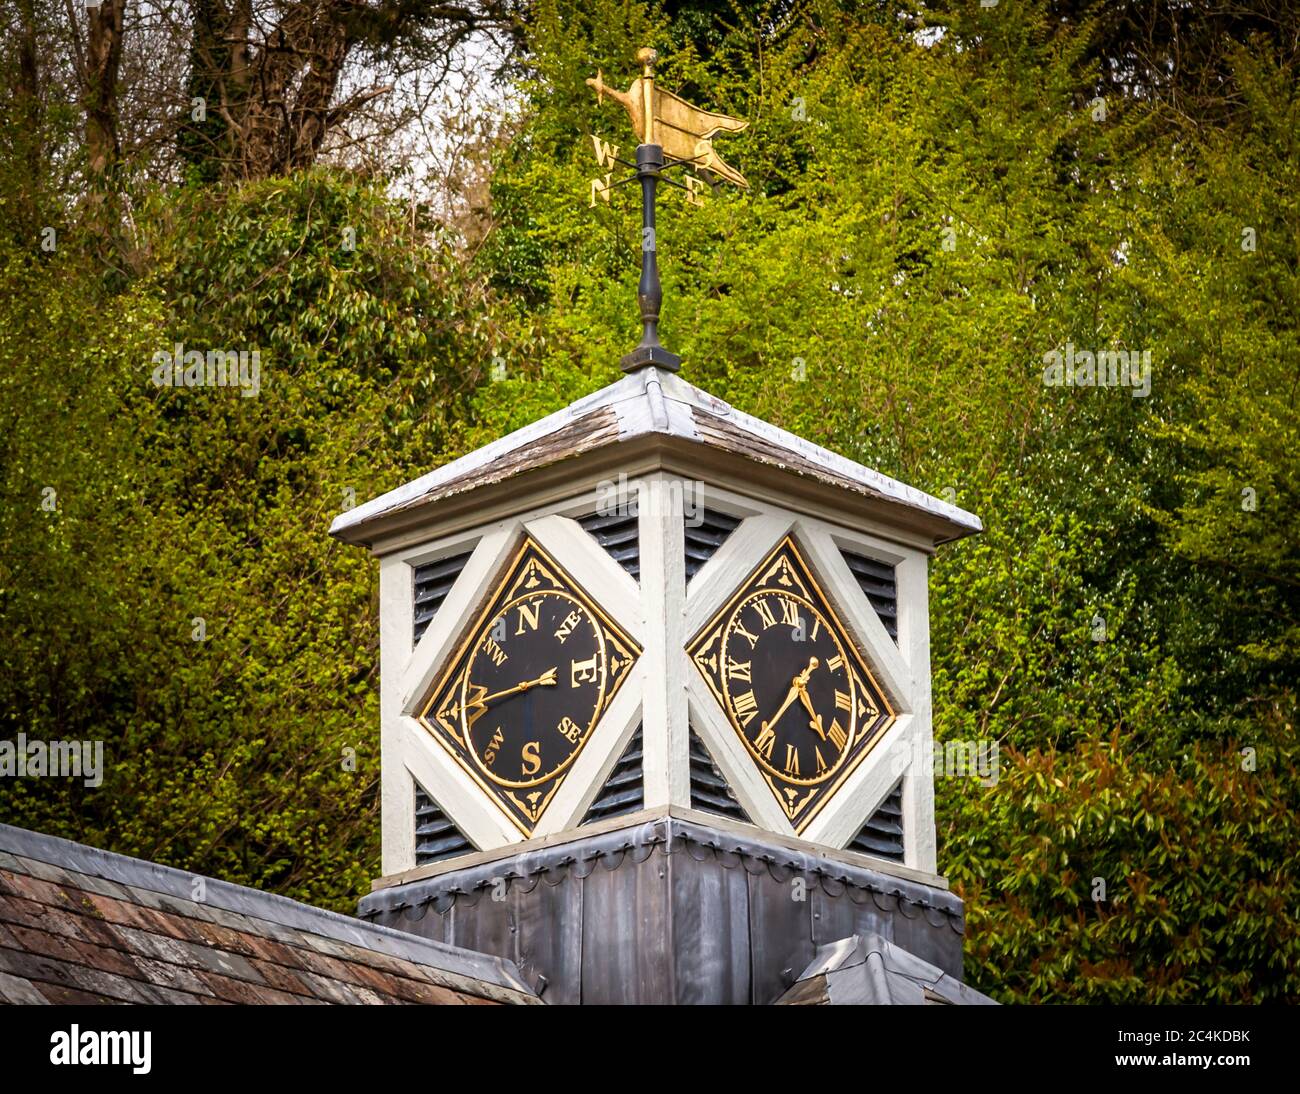 Tower clock and solar compass on the roof of Endsleigh Hotel in West Devon, England Stock Photo